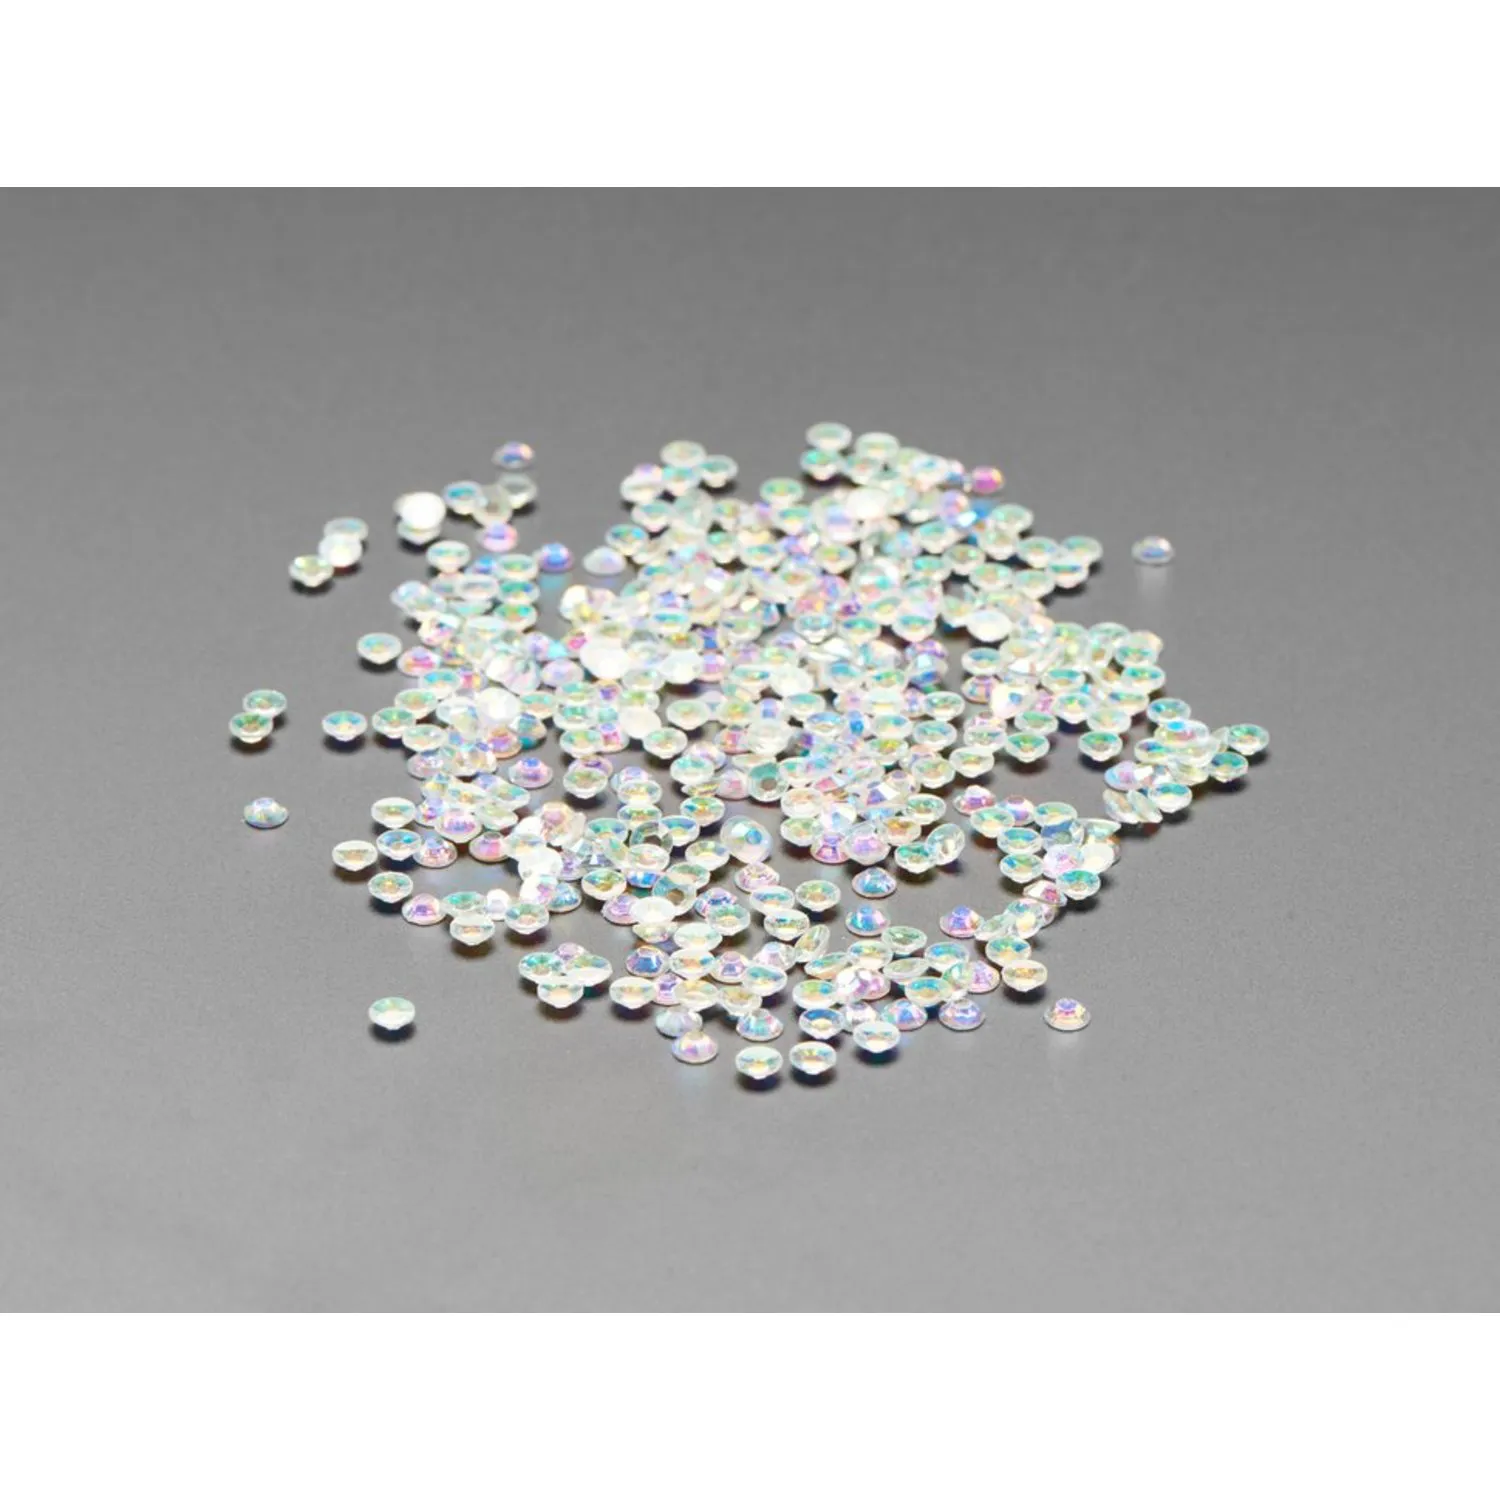 Photo of No-Foil Flat Back Rainbow Crystals for NeoPixel LEDs - 100 pack - SS16